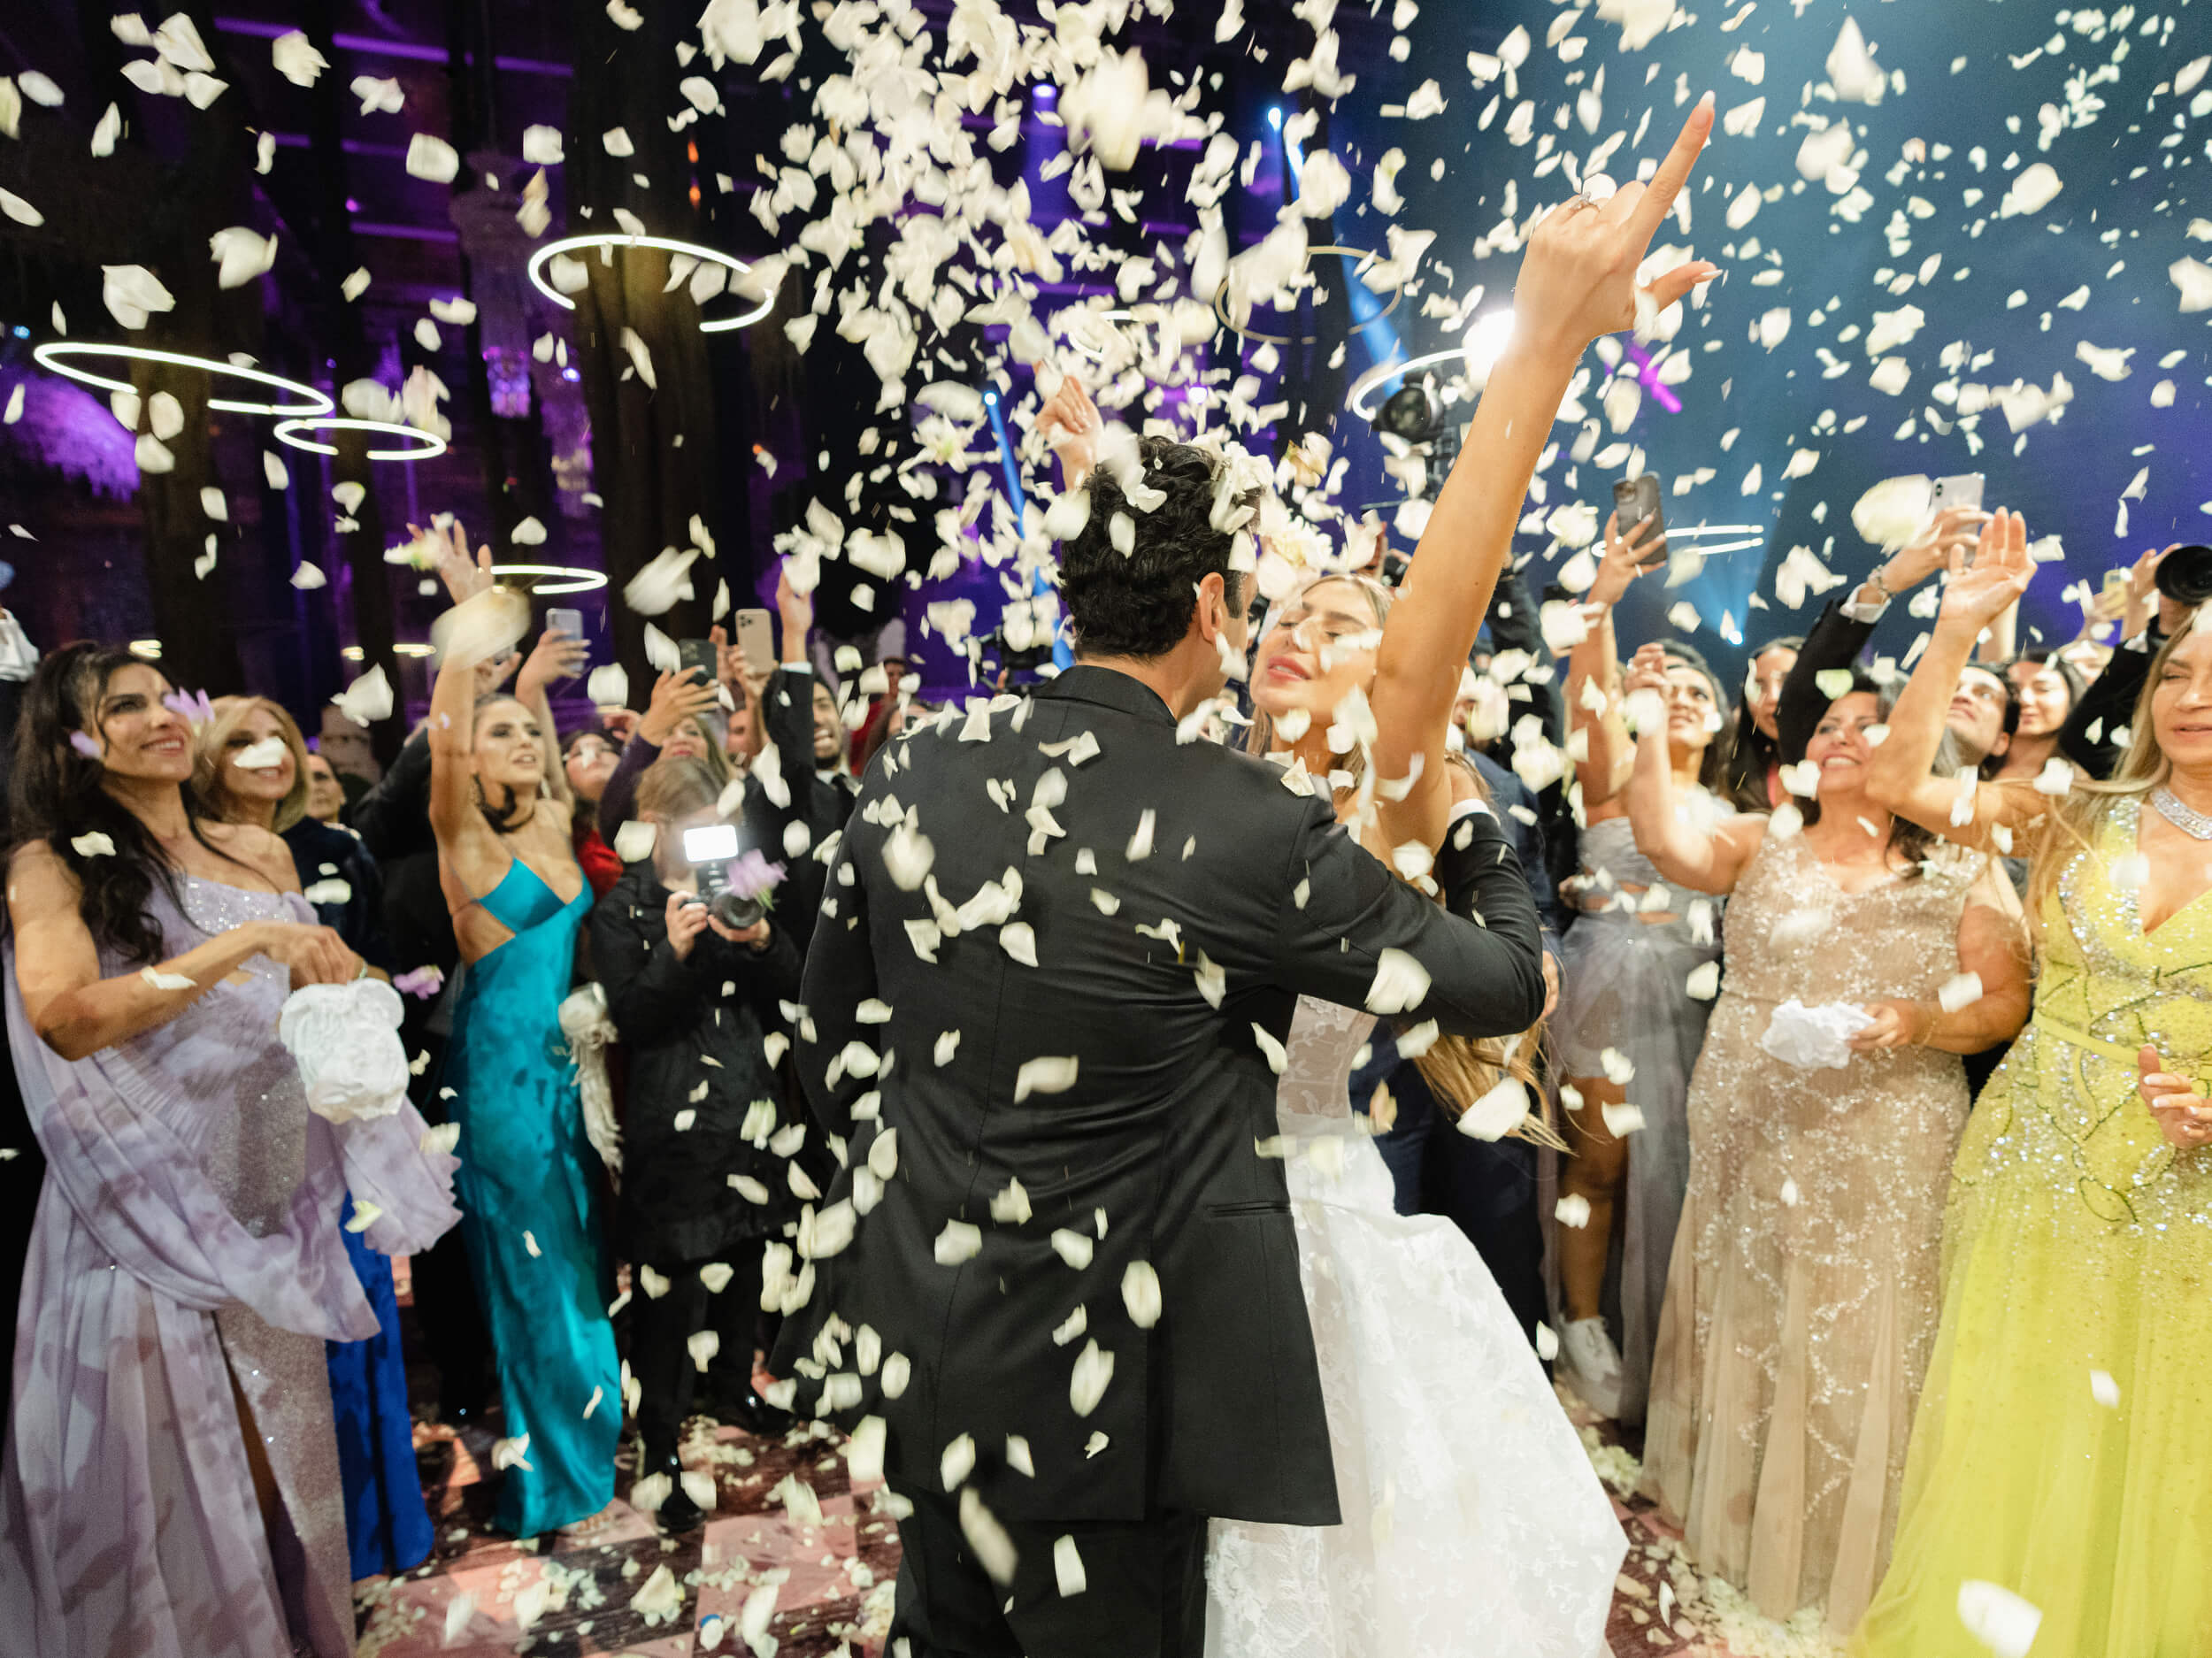 Ashley and Brian celebrating as guests cheer and flower petals fall from above